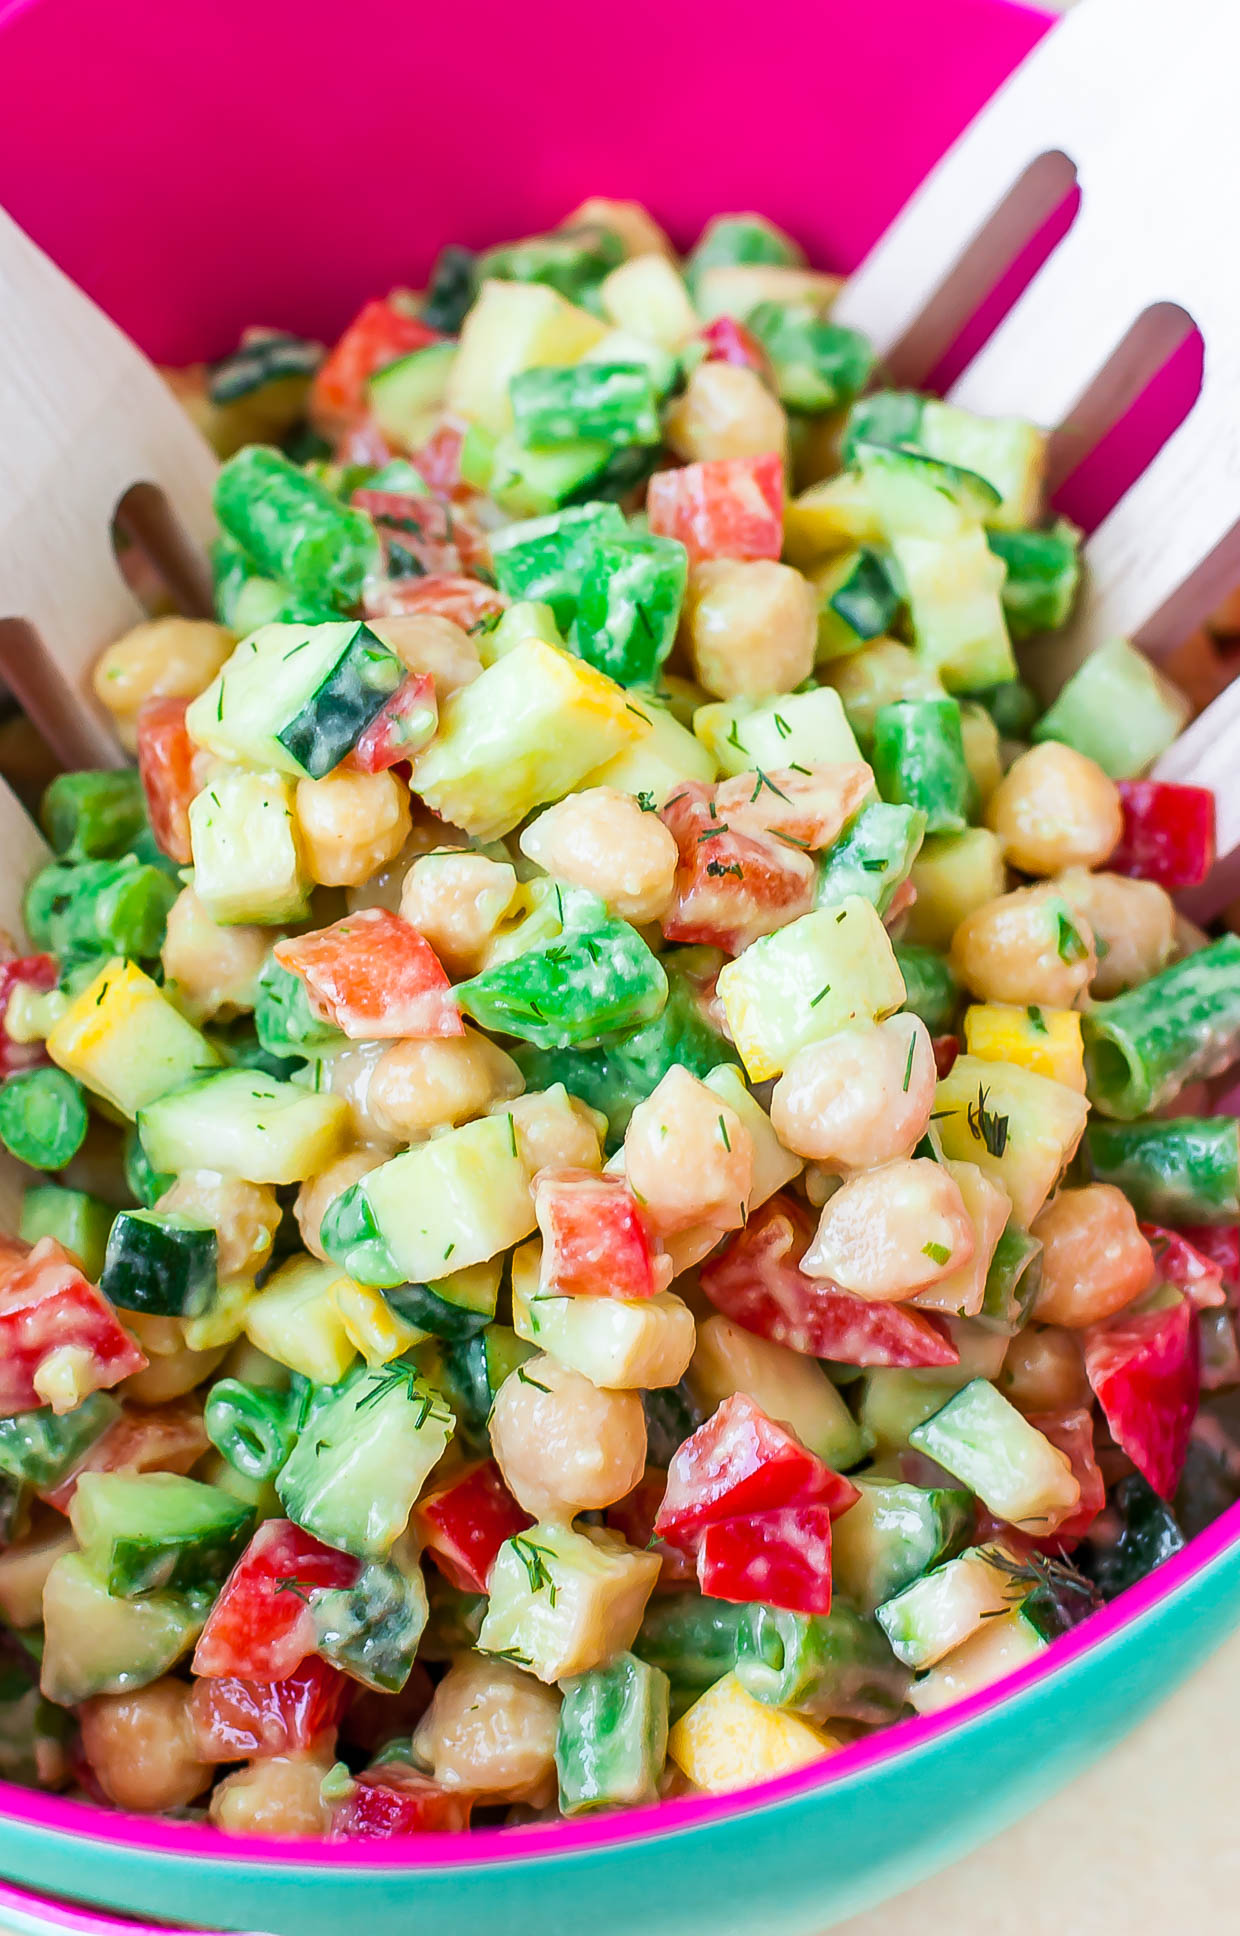 This Farmer's Market Chopped Salad is topped with an irresistible avocado dill dressing that is sure to earn itself a spot on the table with all your glorious Summer eats! Vegan + Paleo